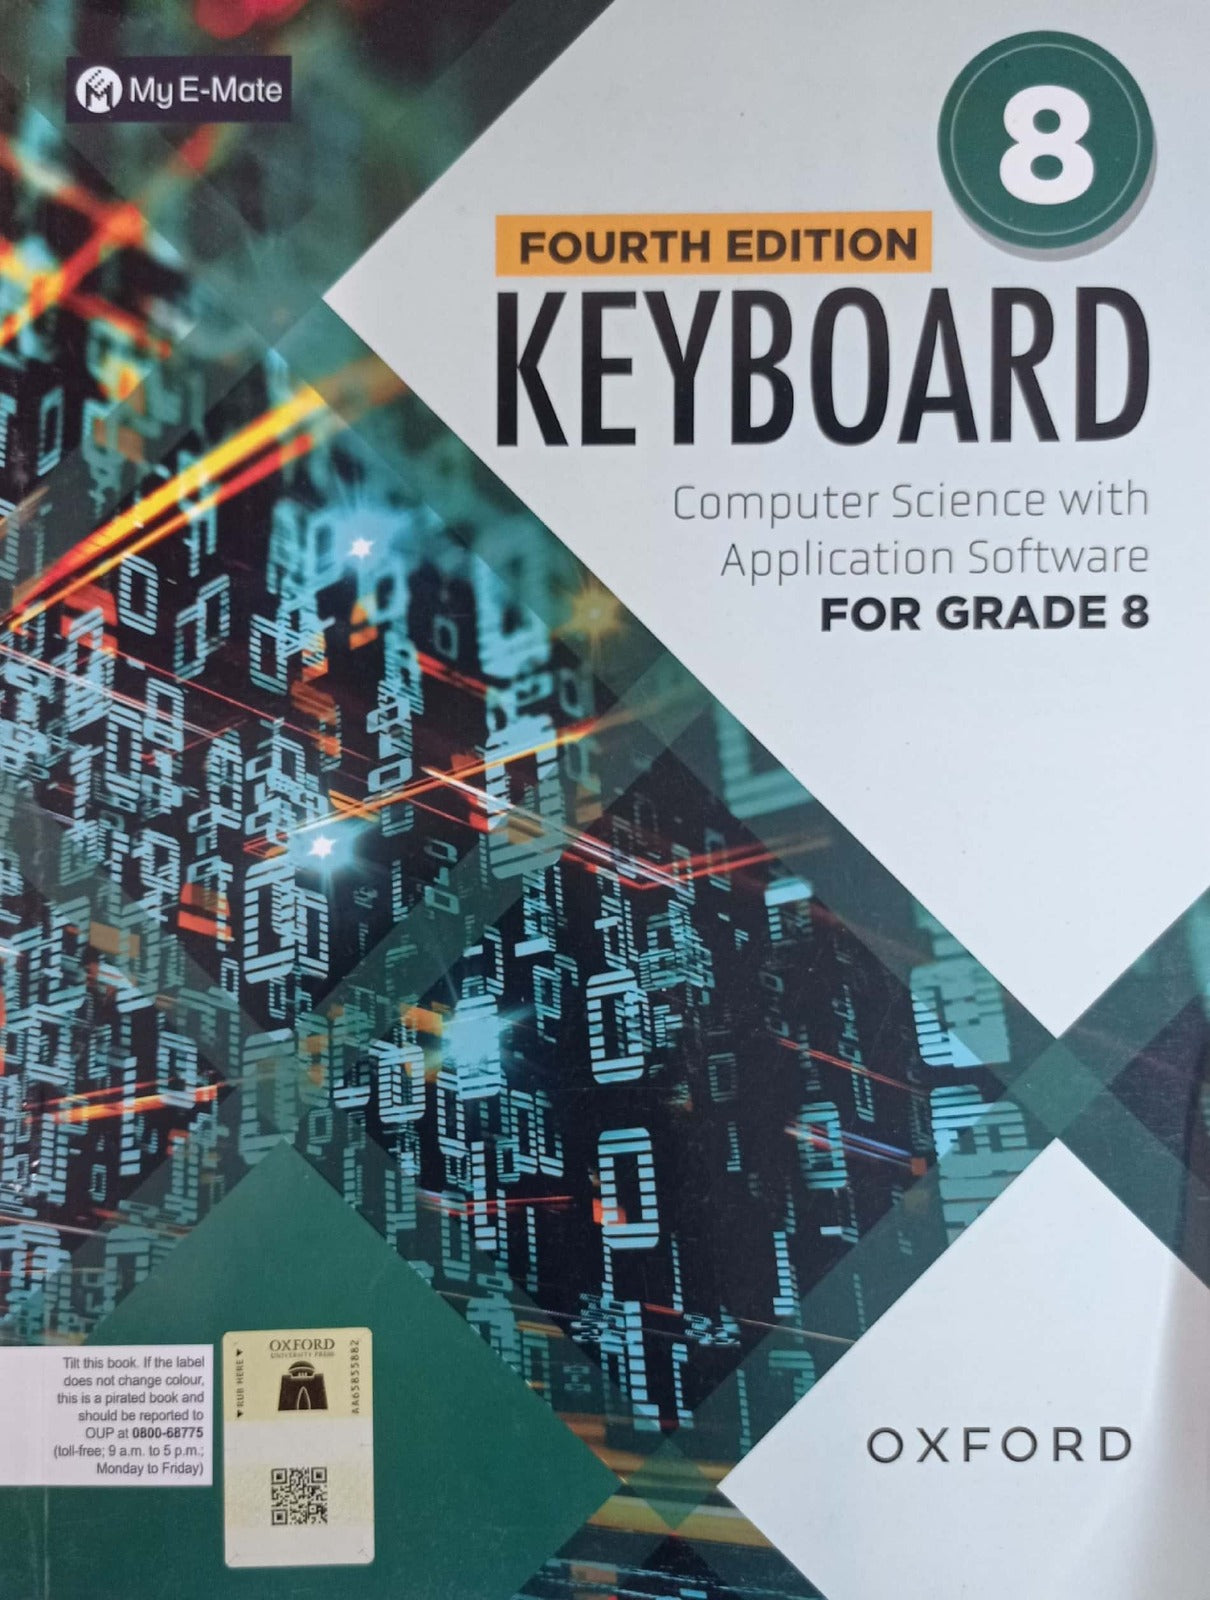 Keyboard Computer Science with Application Software for Grade 8 (4th Edition)